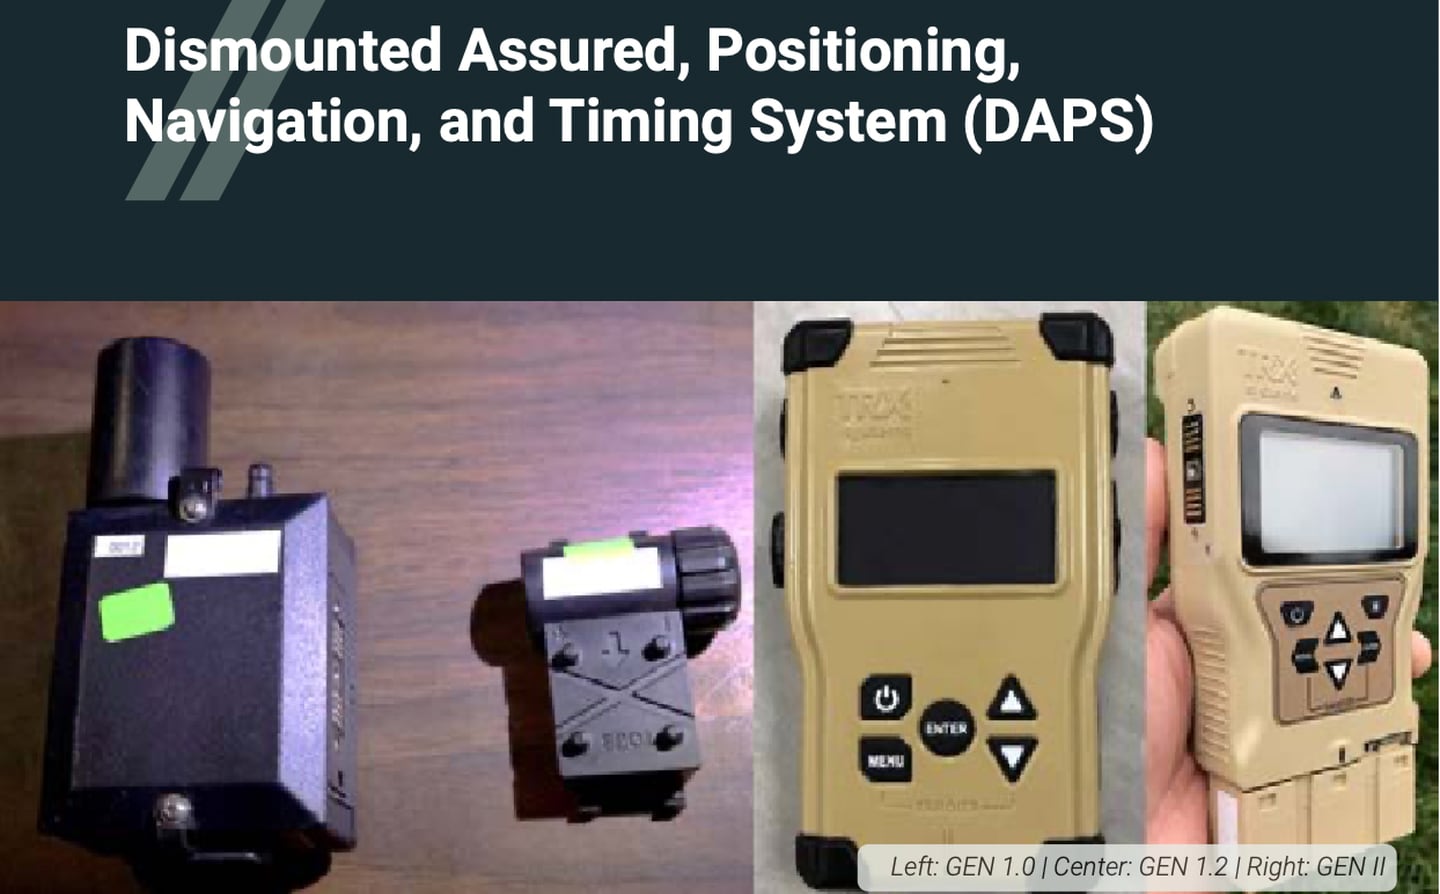 These images, taken from the Office of the Director of Operational Test and Evaluation's fiscal 2022 report, show different versions of the DAPS technology.